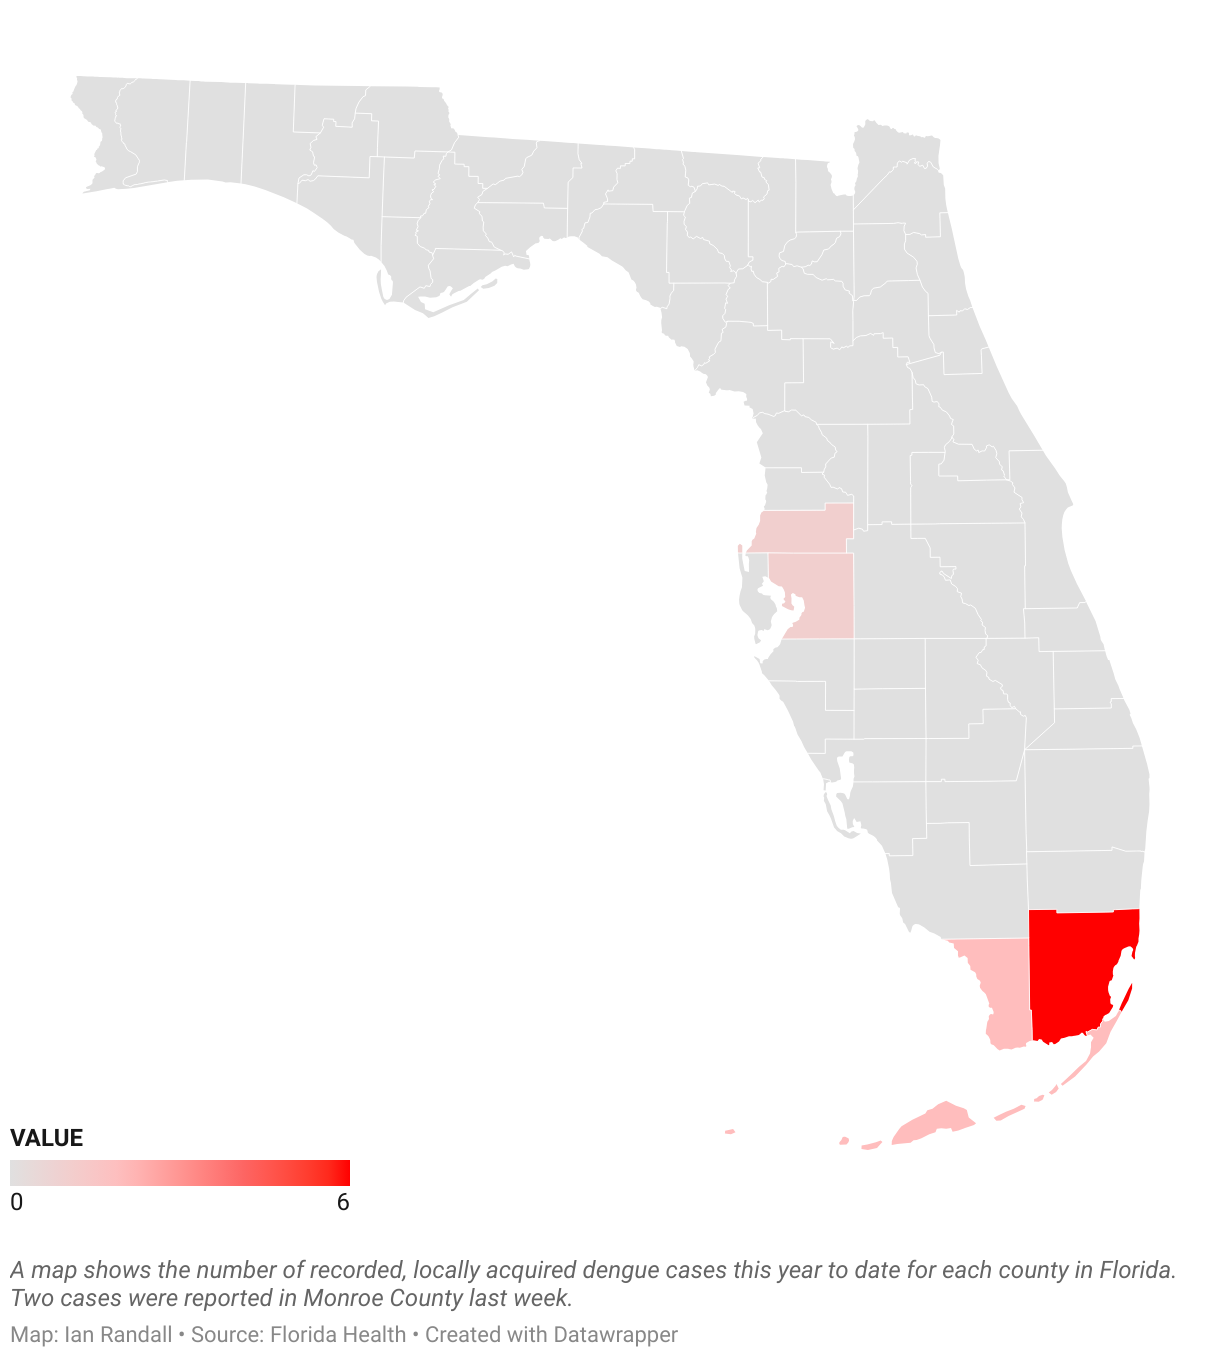 A map shows the number of recorded, locally acquired dengue cases this year to date for each county in Florida.